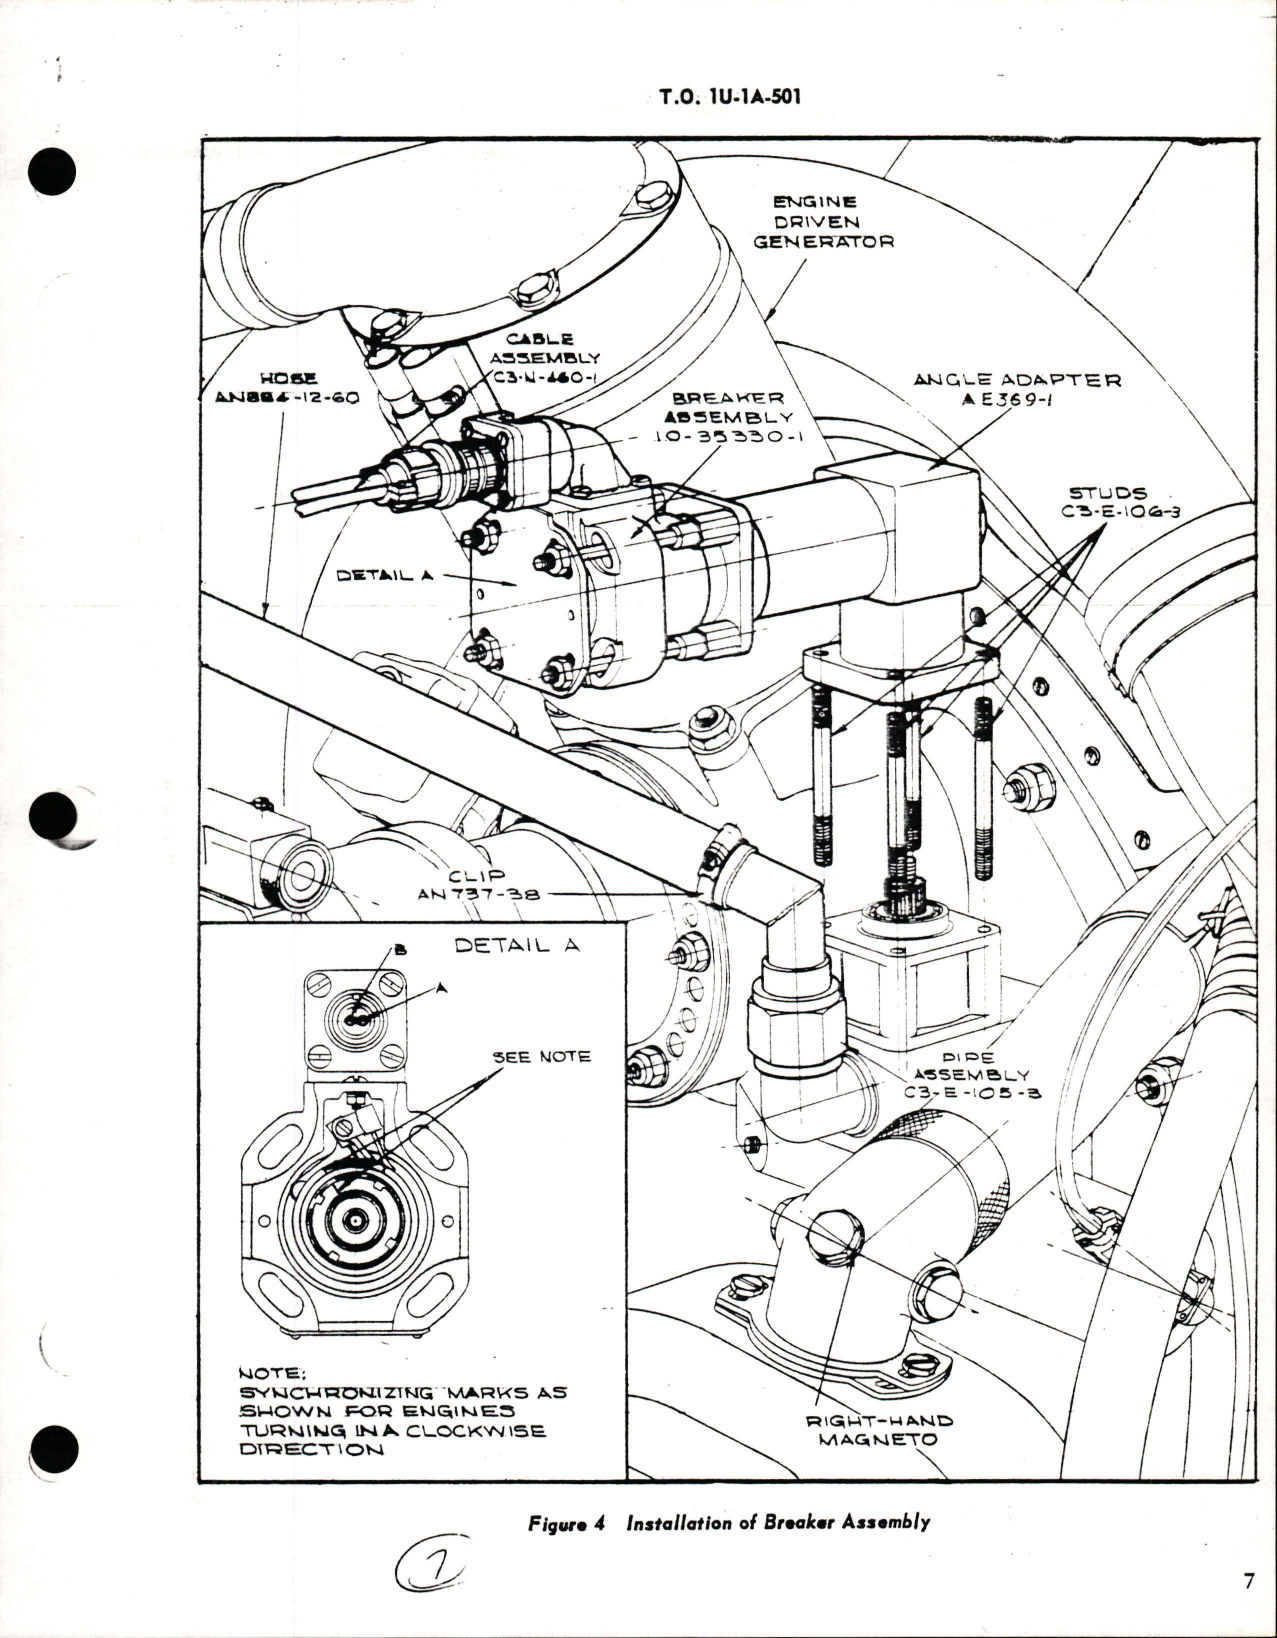 Sample page 7 from AirCorps Library document: Flight Manual for DHC-3 Otter